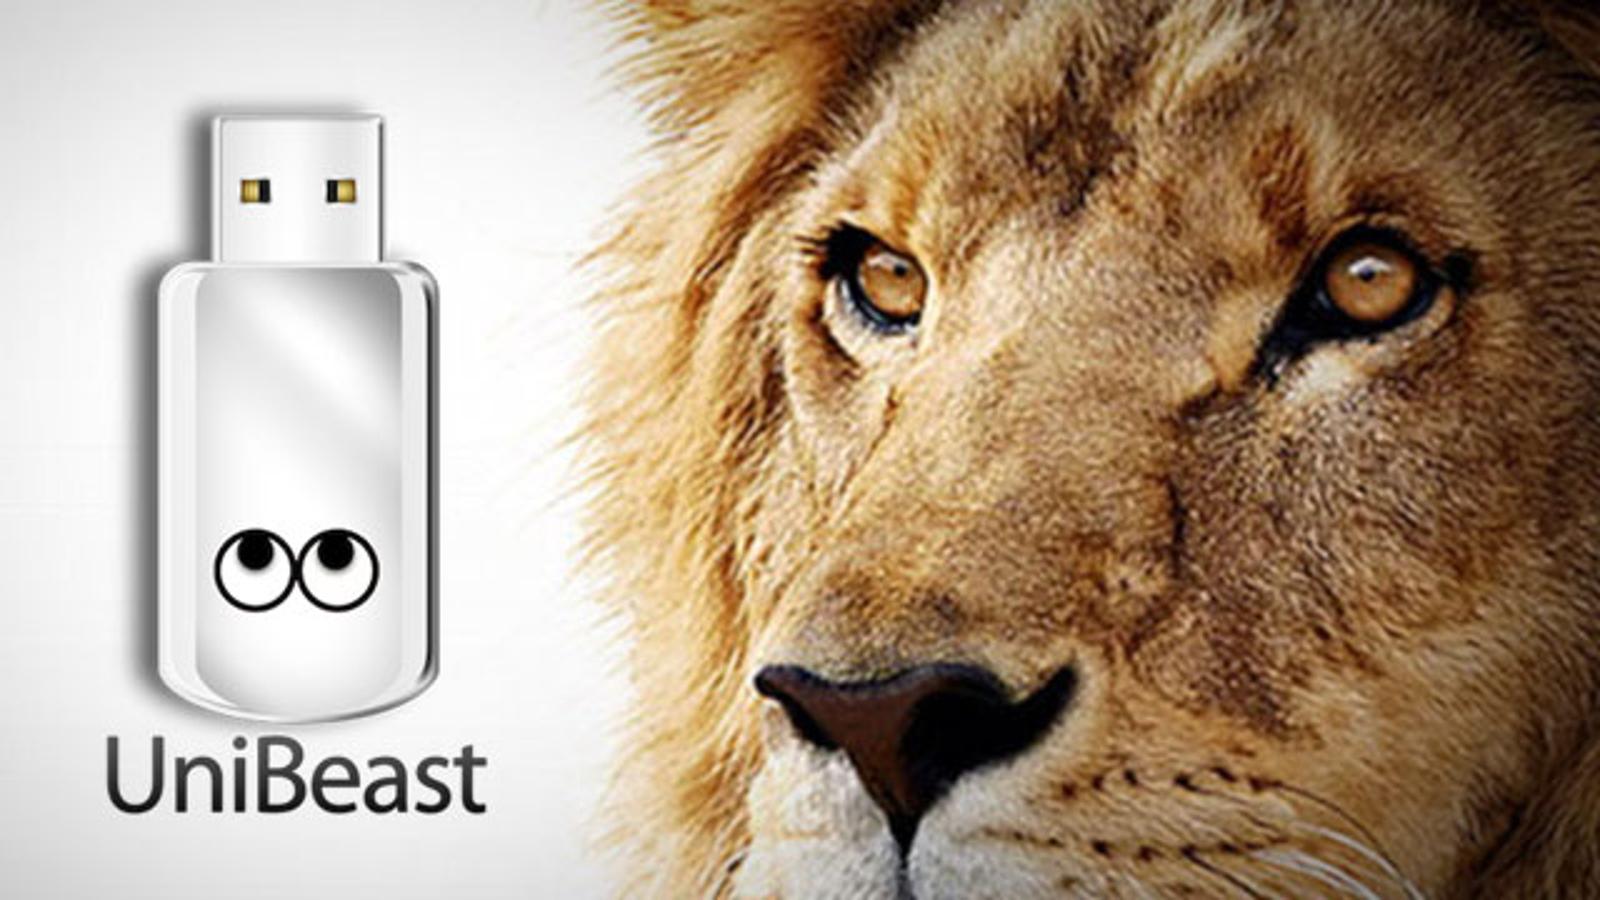 The Lion King for apple instal free